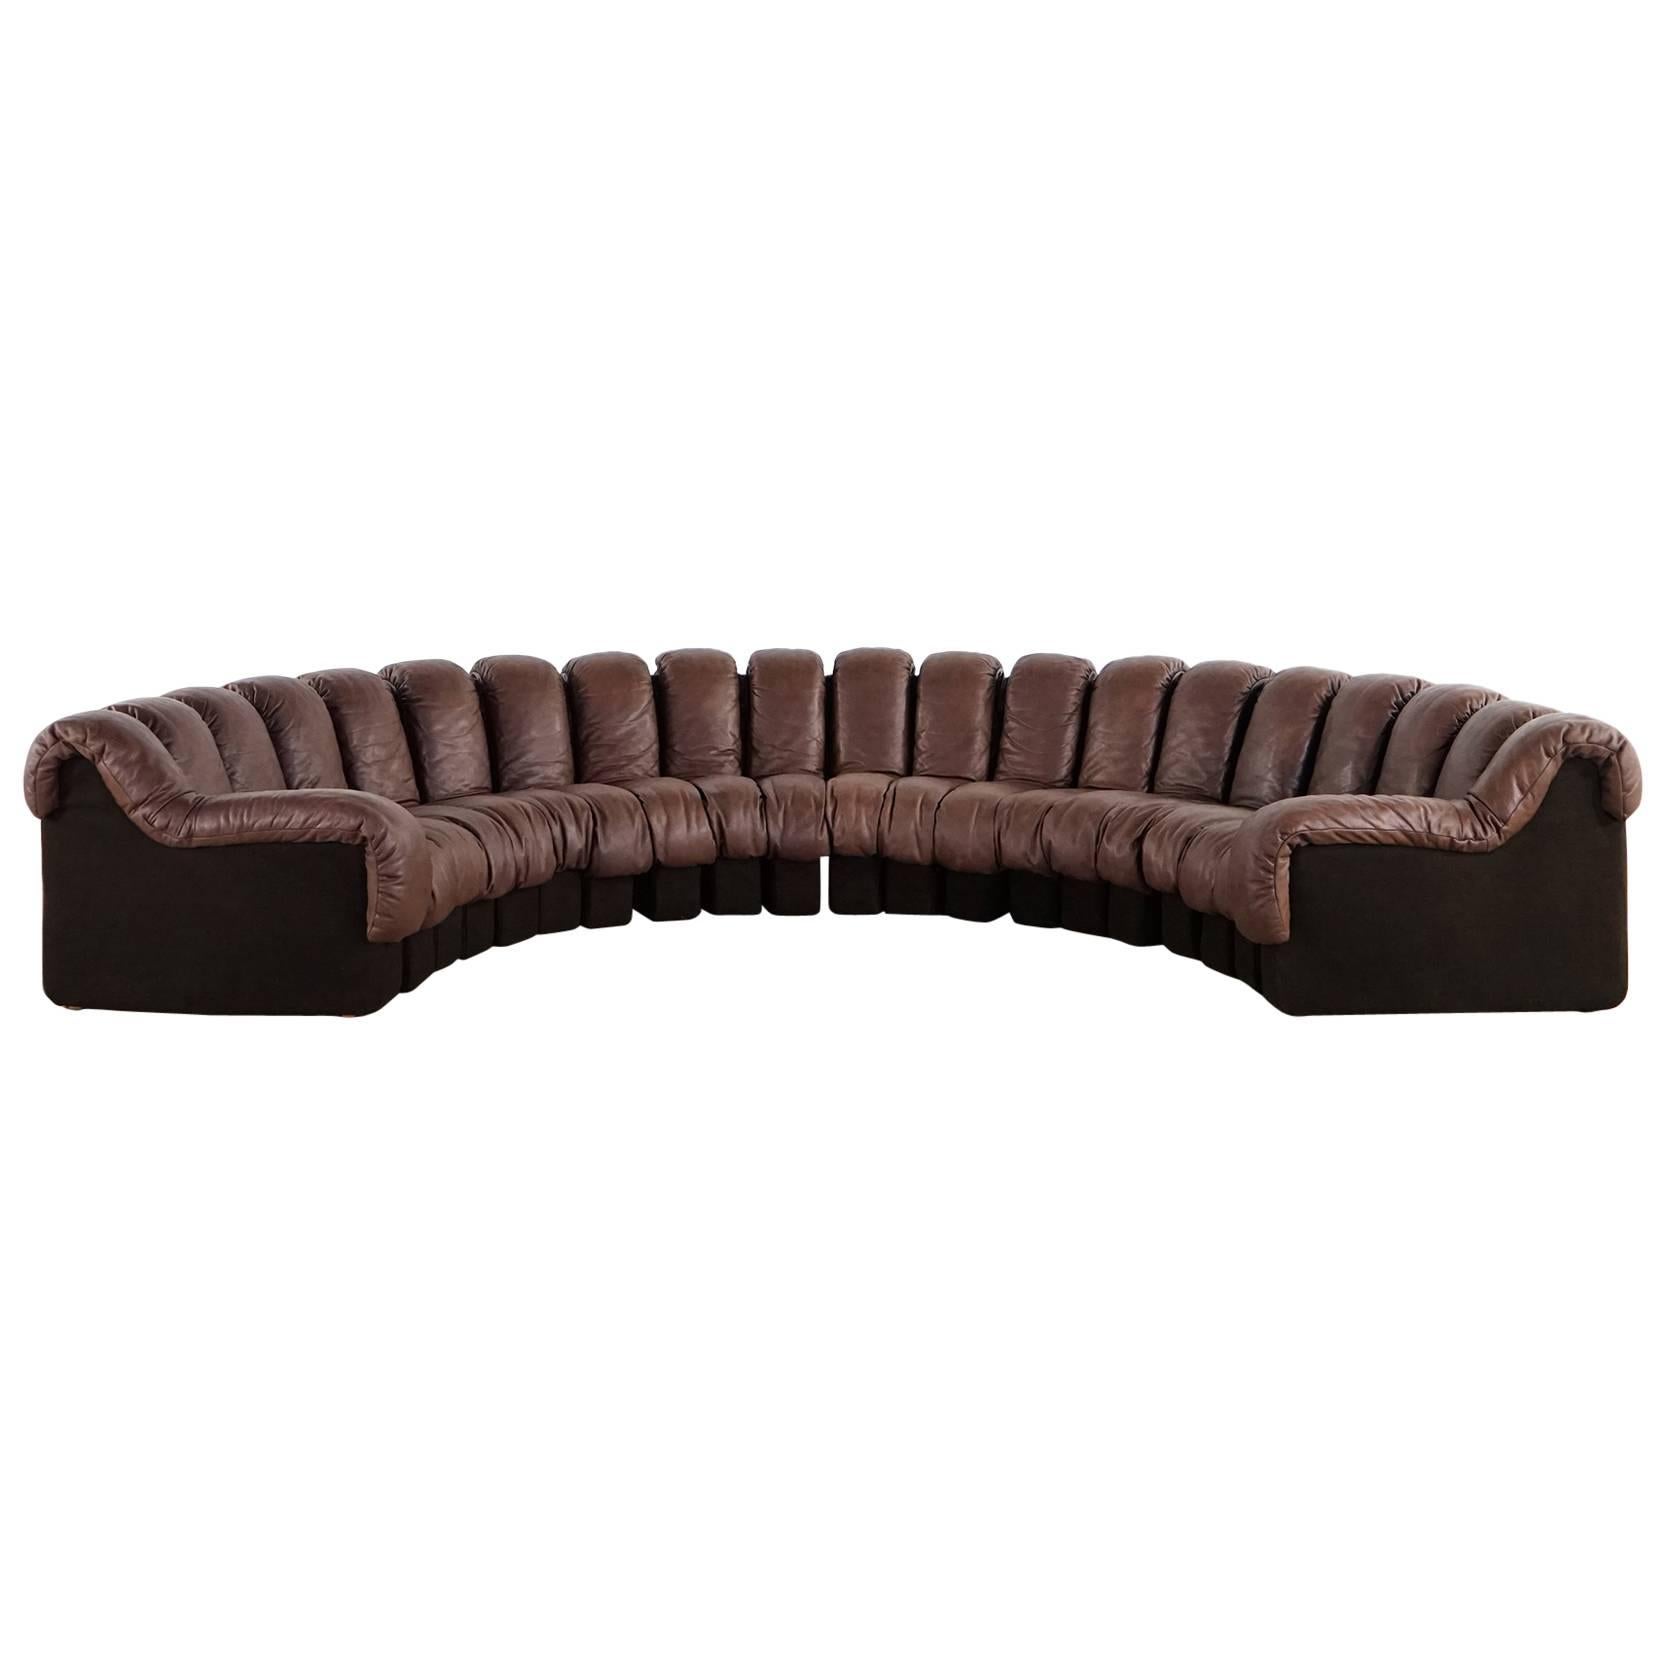 De Sede Ds 600 Sofa by Ueli Berger and Riva 1972, Chocolate Leather 20 Elements